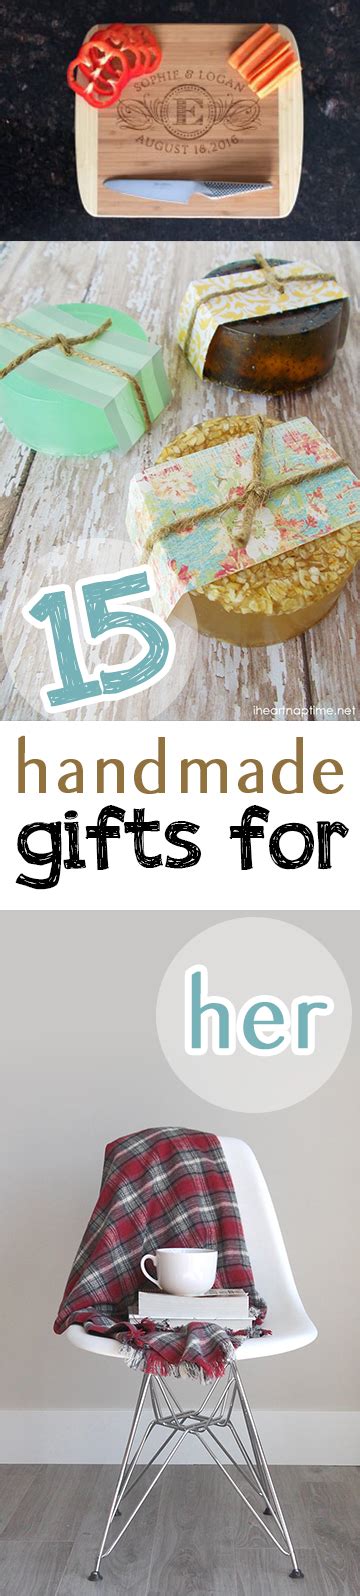 This gift could be added to the list of cute gifts for girlfriend. 15 Handmade Christmas Gifts for Her - Picky Stitch